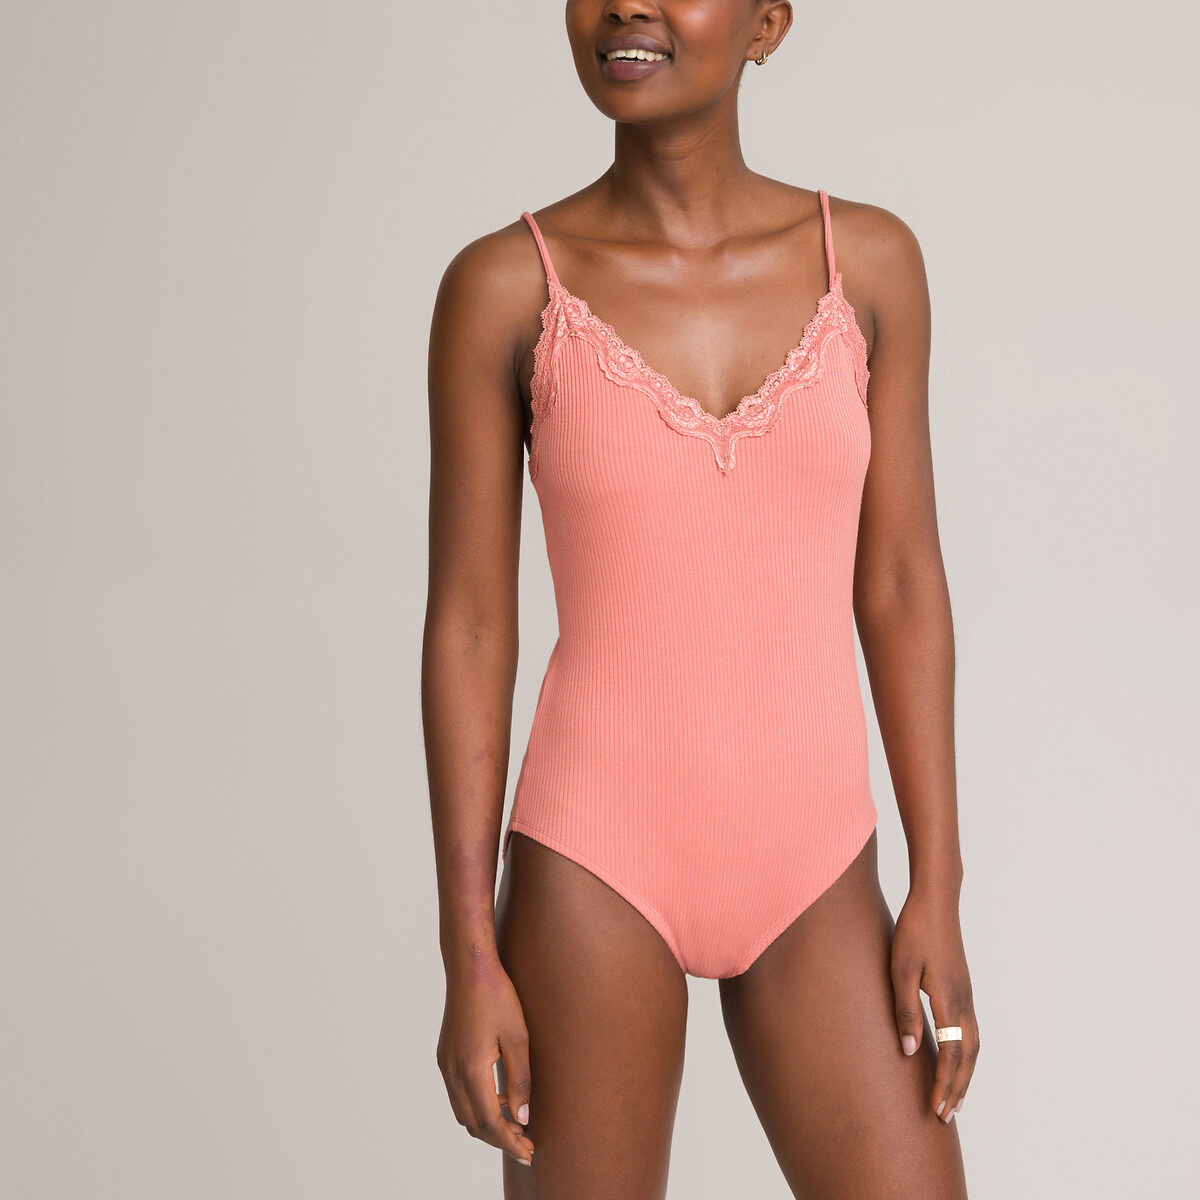 Cami bodysuit, pink, La Redoute Collections